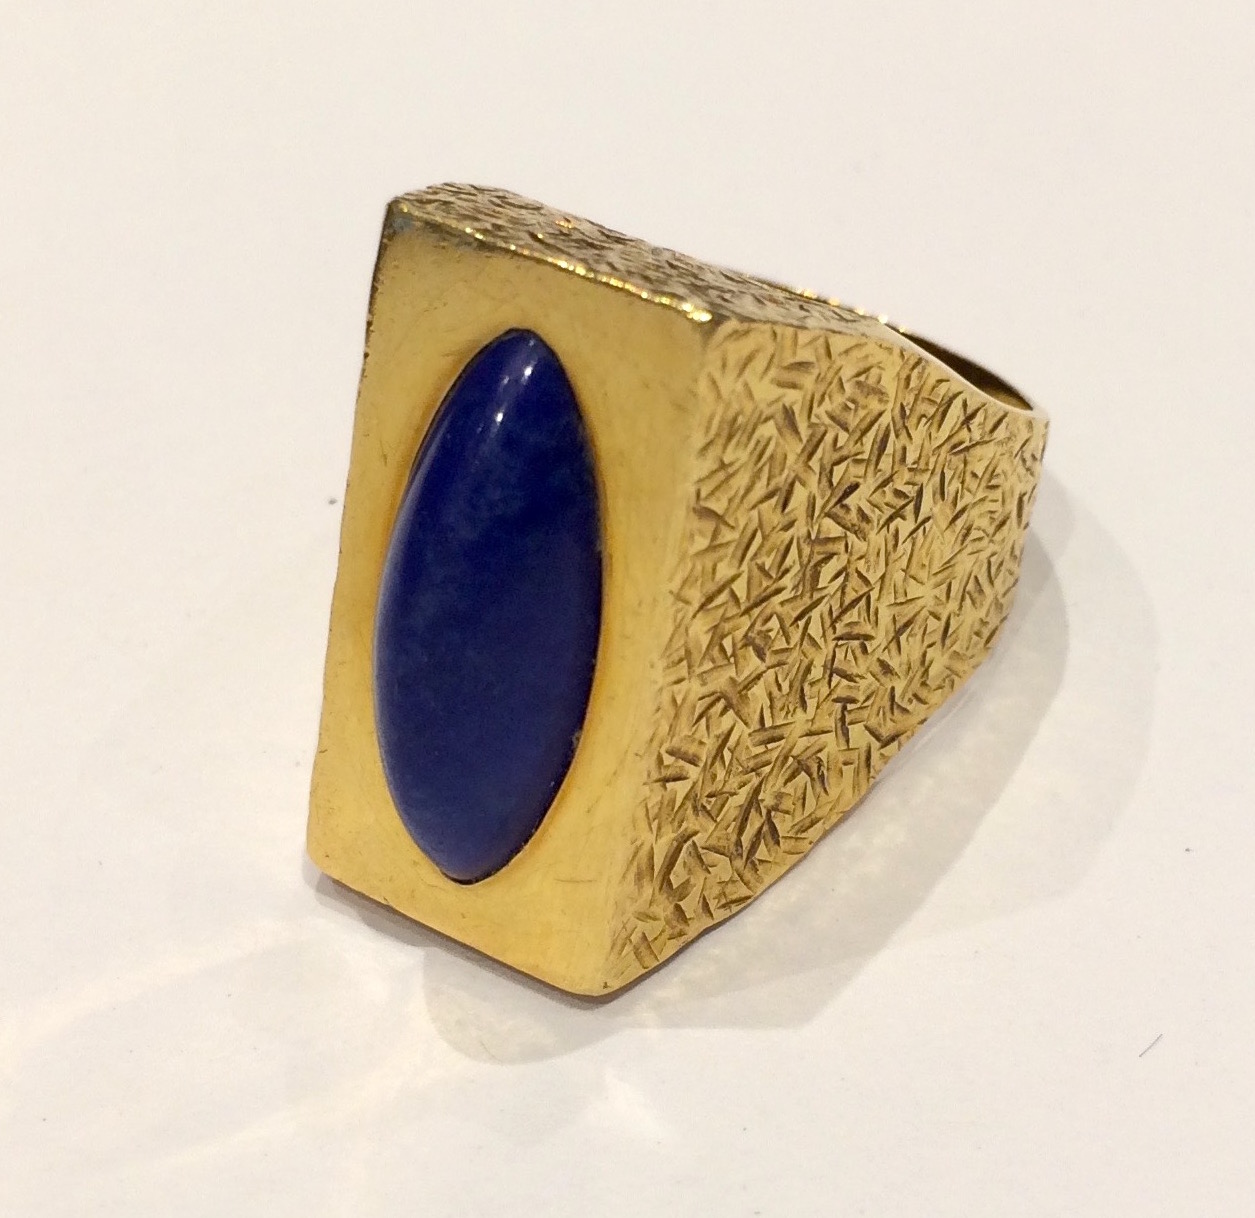 Andrew Grima, “Egyptian” textured 18K gold and elongated cabochon lapis lazuli  ring, signed and British date marks for 1972